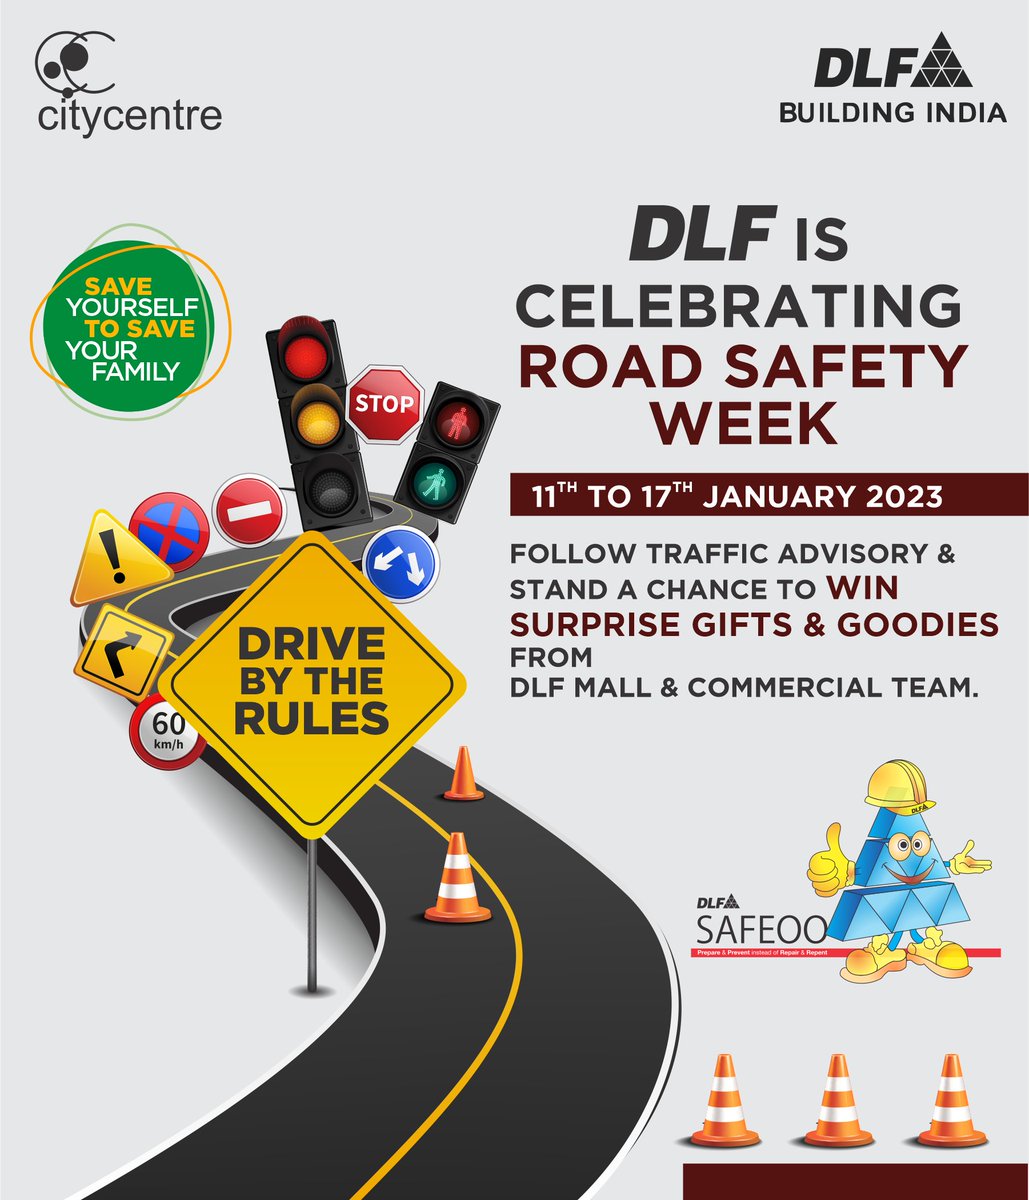 Securing Safety!
Take a #SafeRoute through all the #TrafficRules & Regulations with a #chancetowin #SurpriseGifts & #Goodies on observation of #NationalRoadSafetyWeek  at #DLFCityCentreChandigarh.
#RoadSafetyWeek #RoadSafety #SaveYourLife #DriveSafe #SafetyFirst #DLFIndia